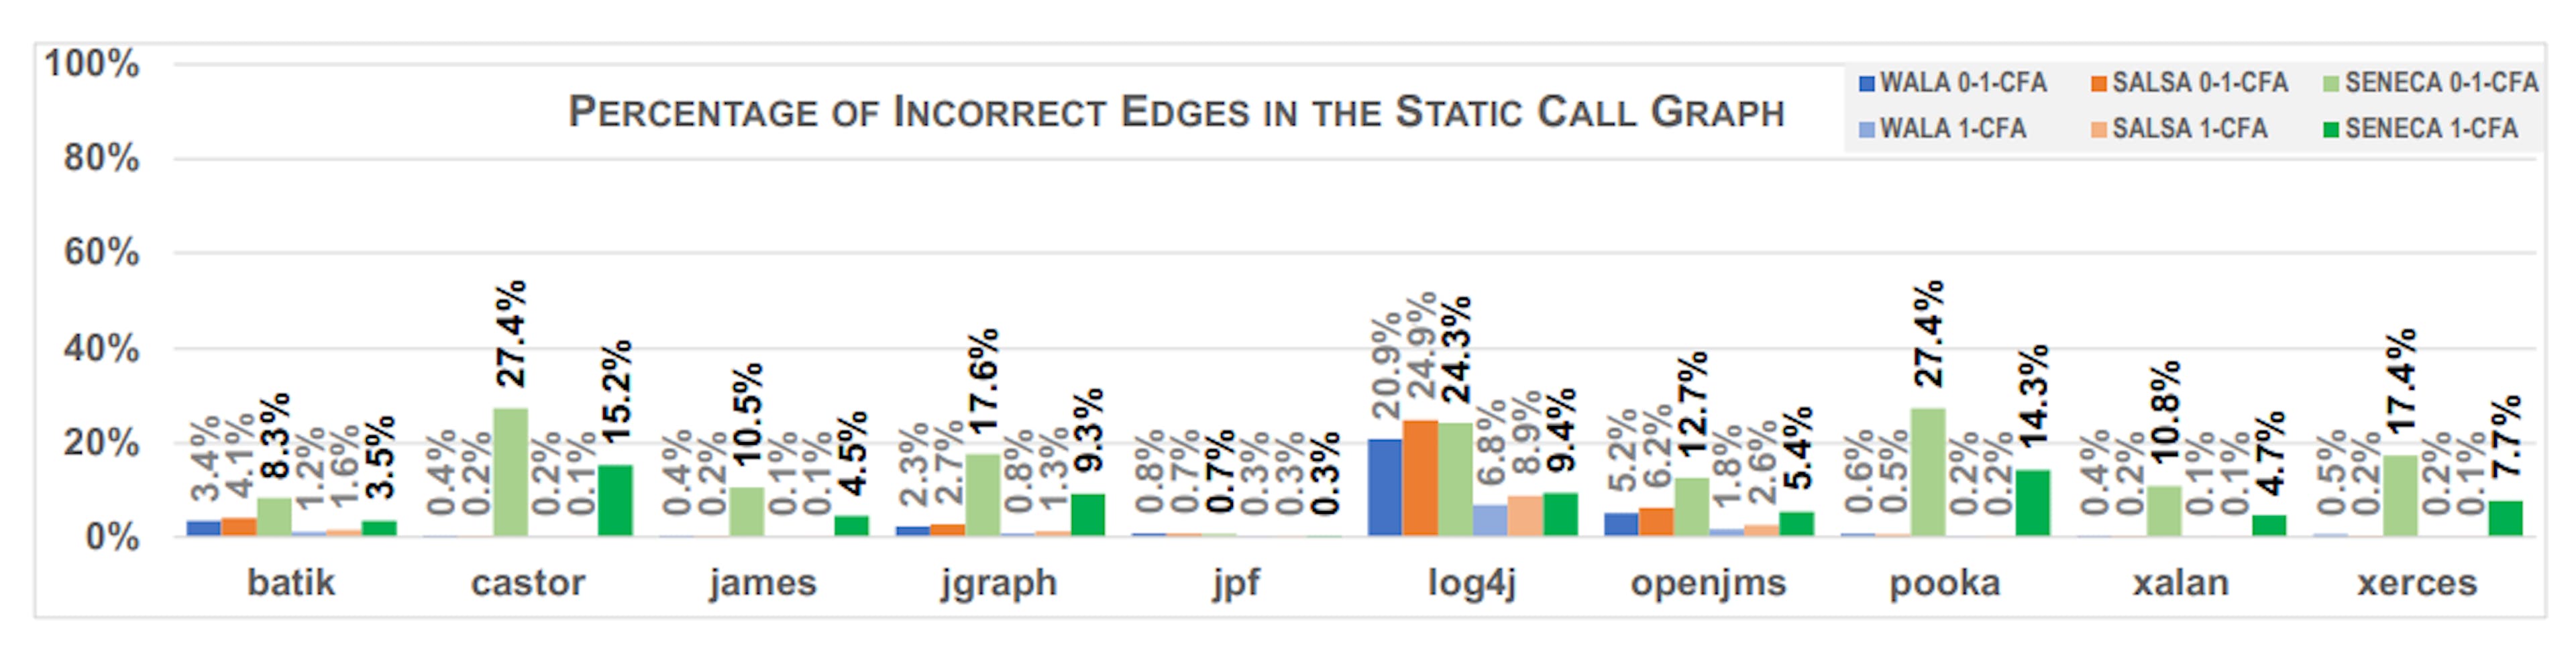 Fig. 9. Percentage of incorrect edges (i.e., edges in the runtime CG not in the static CG) for each approach